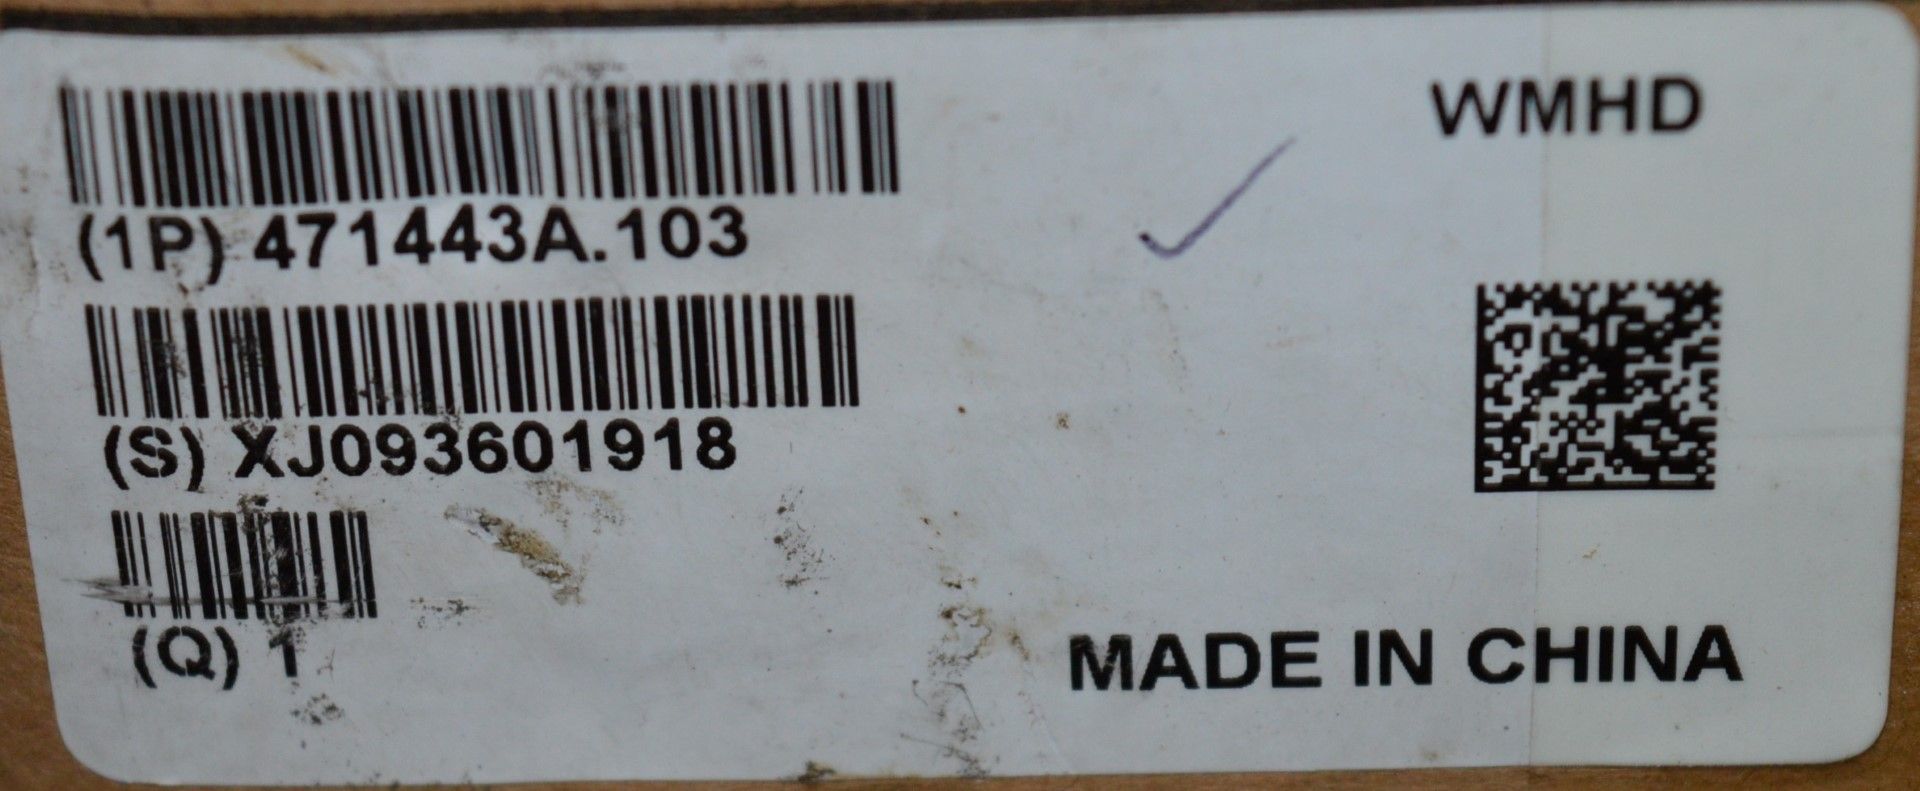 1 x Nokia Siemens Networks WMHD 471443A.103 Transcoder - Unused Boxed Stock - CL300 - Ref PC263 - - Image 3 of 6